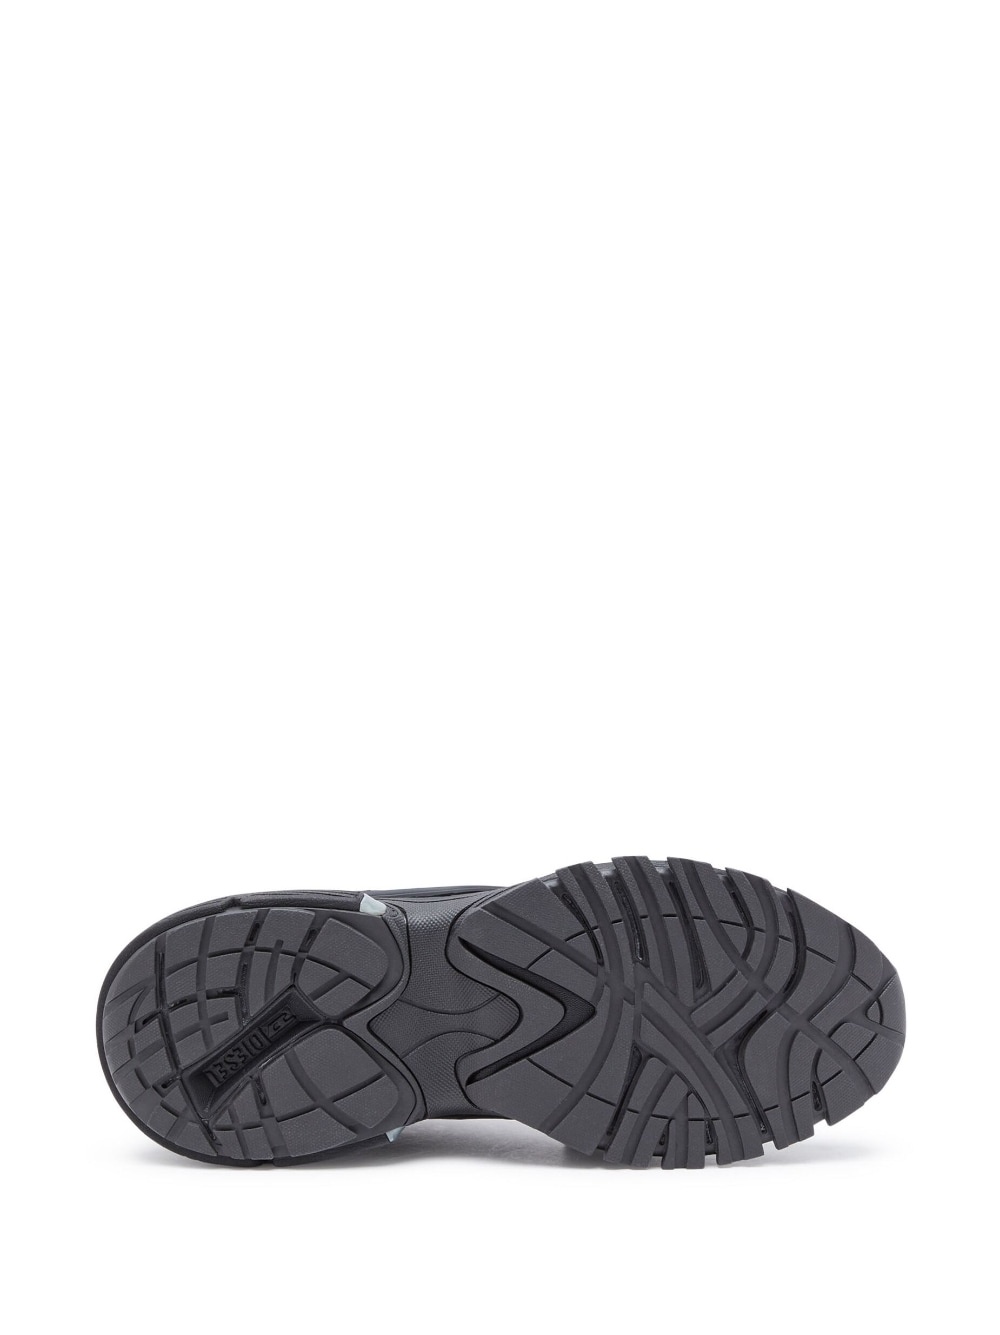 panelled-design low-top sneakers - 4